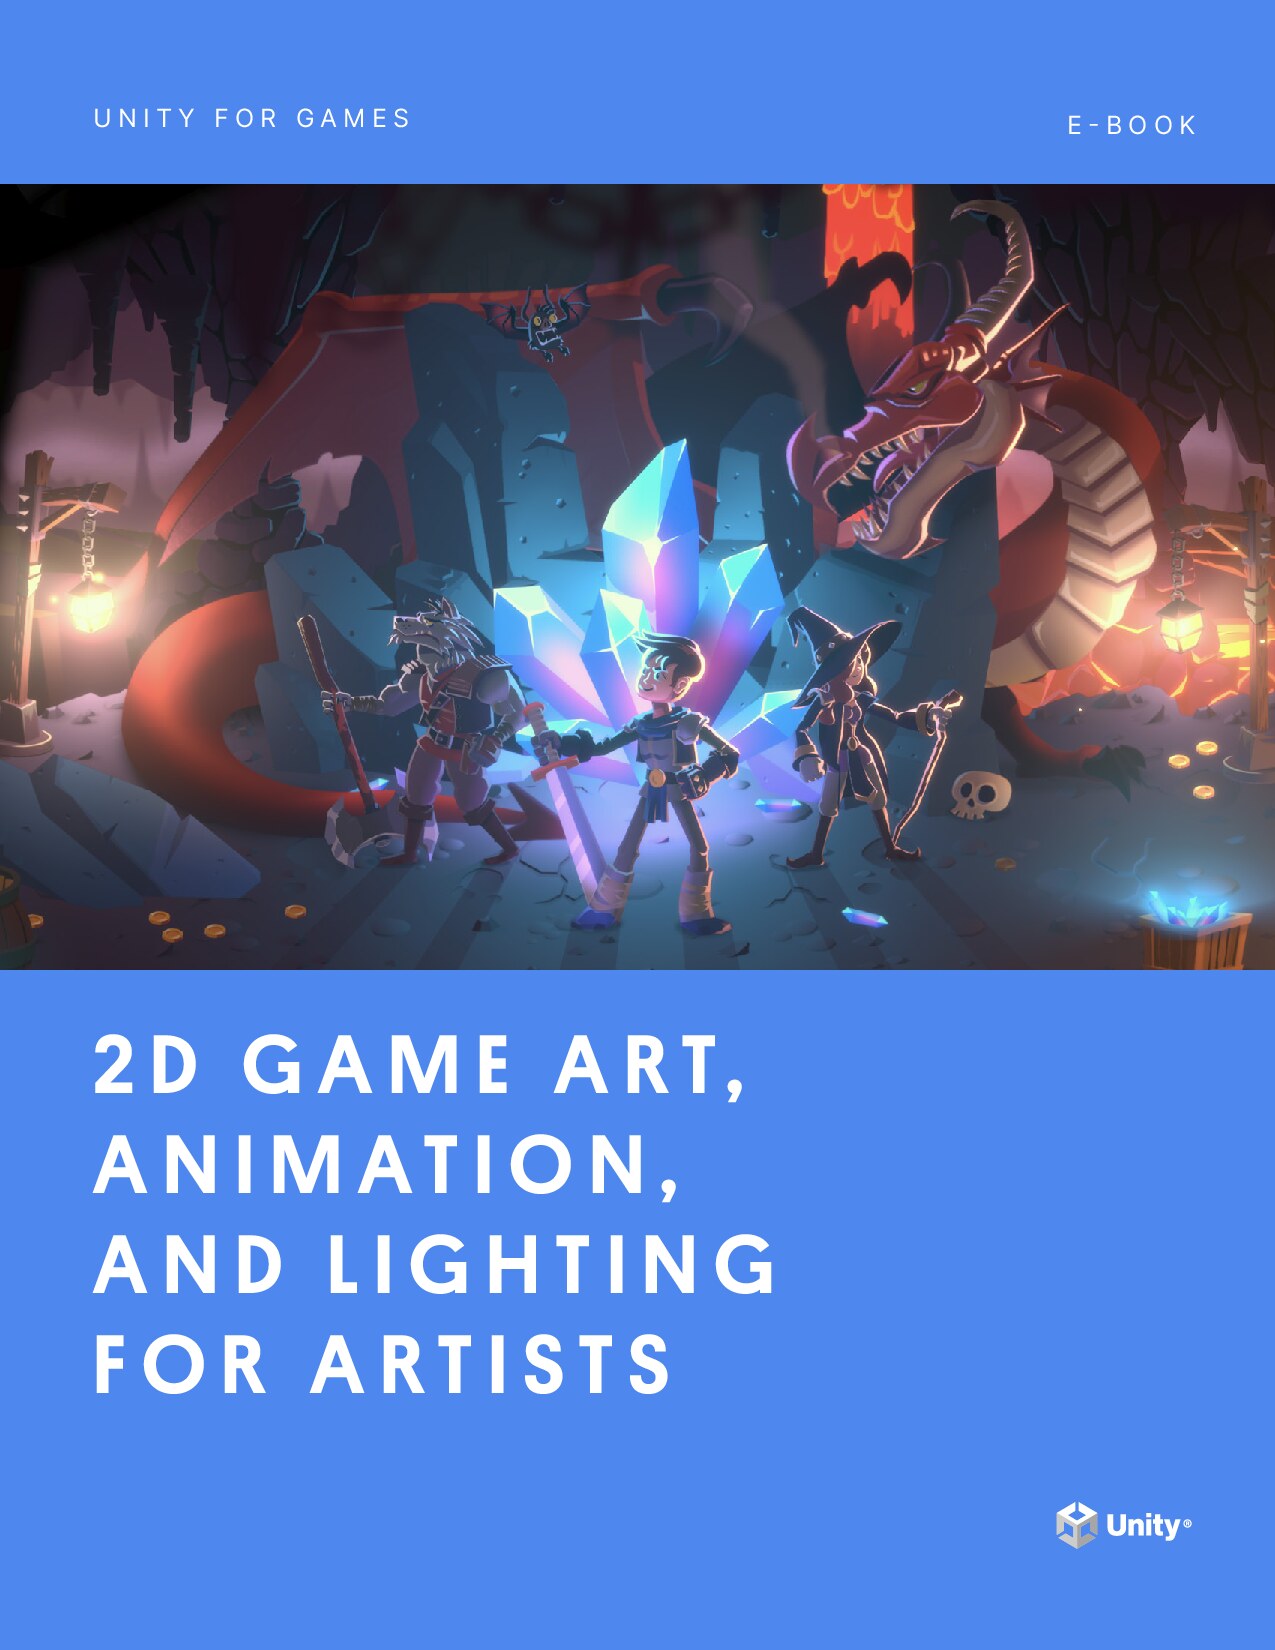 2D game art, animation, and lighting for artists